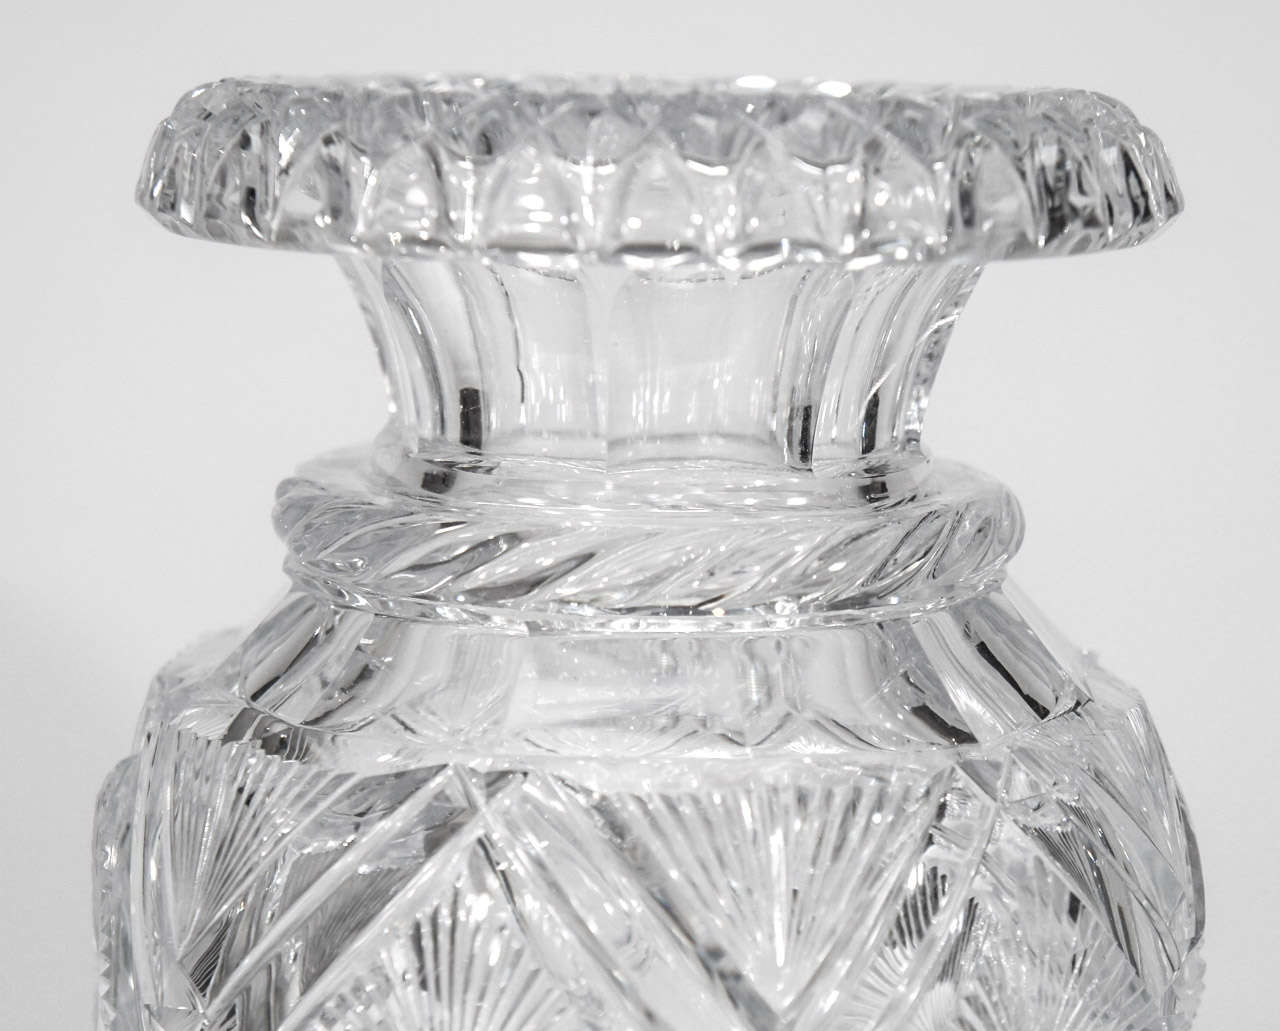 Pair of 19th C. Anglo-Irish Cut Crystal Mantle Vases W/ Square Bases In Excellent Condition For Sale In Great Barrington, MA